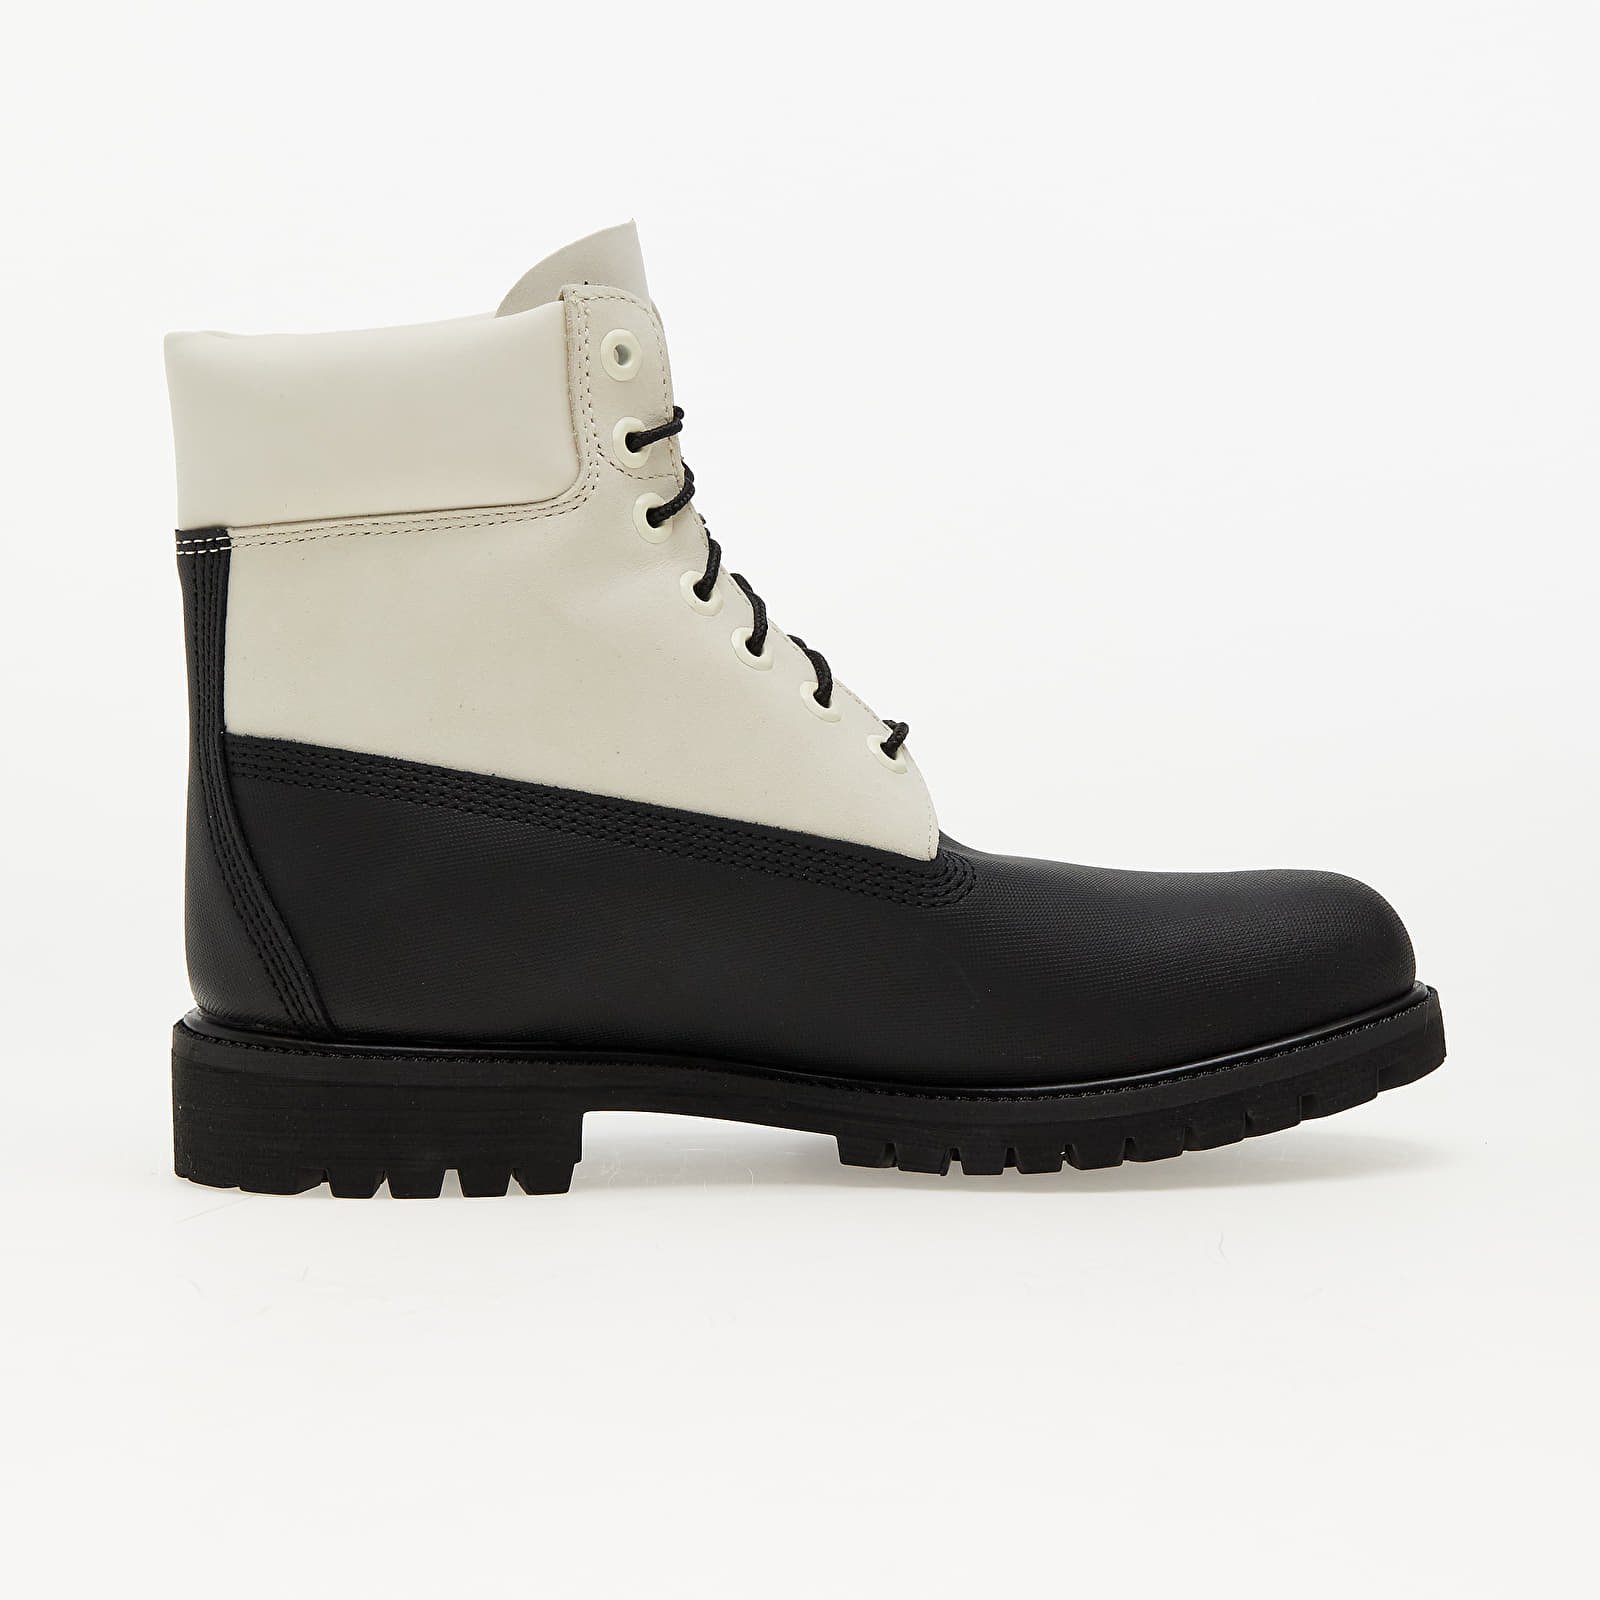 6 Inch Lace Up Waterproof Boot Black